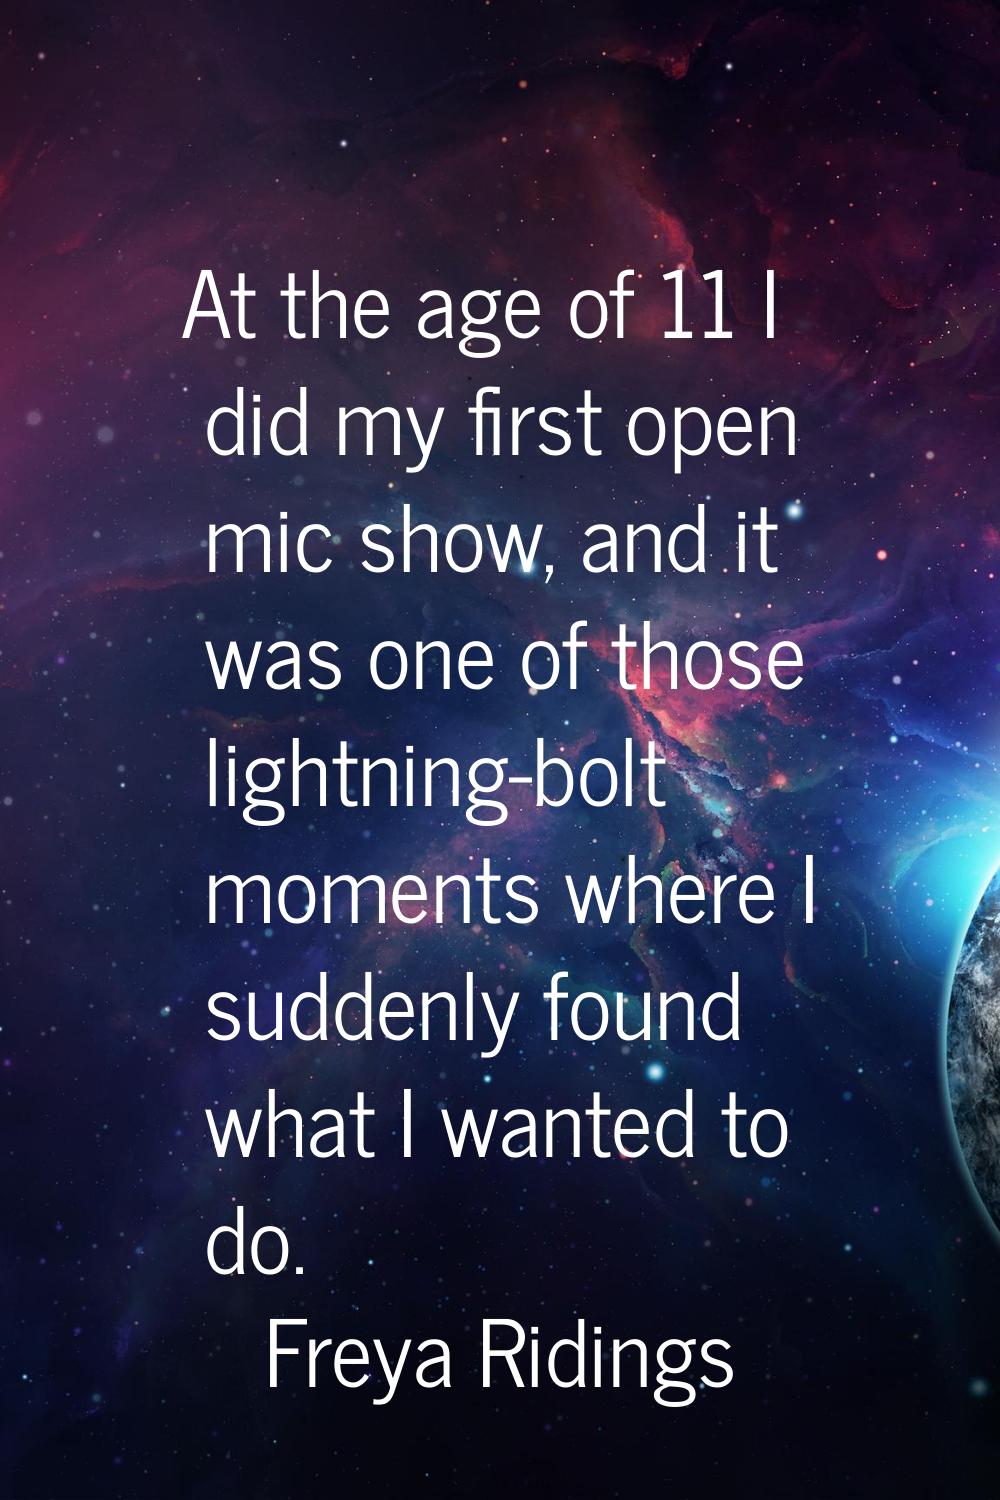 At the age of 11 I did my first open mic show, and it was one of those lightning-bolt moments where